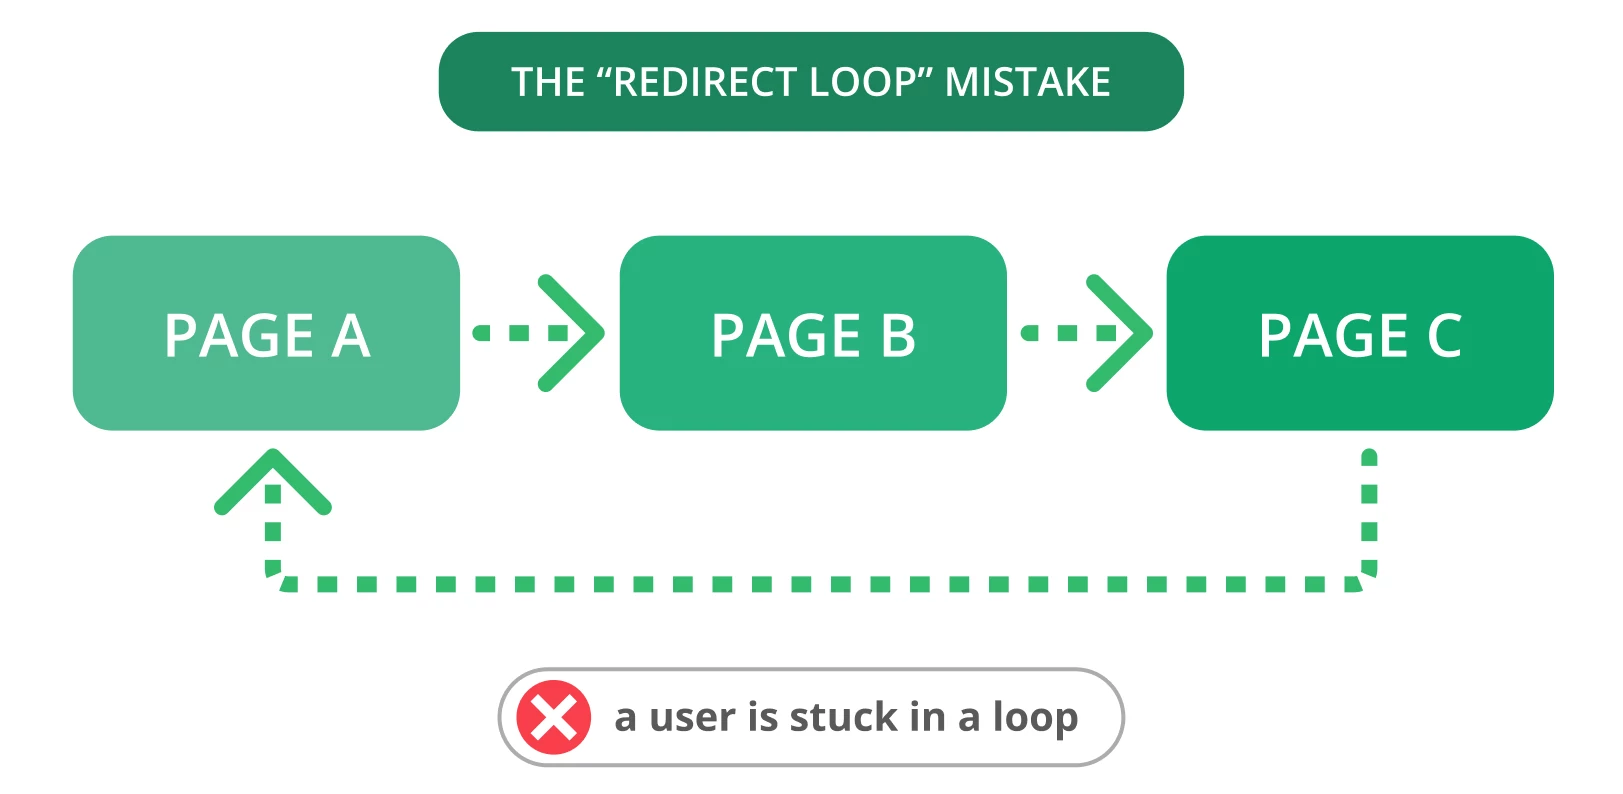 A redirect loop is when one URL redirects to another, returning to the original URL